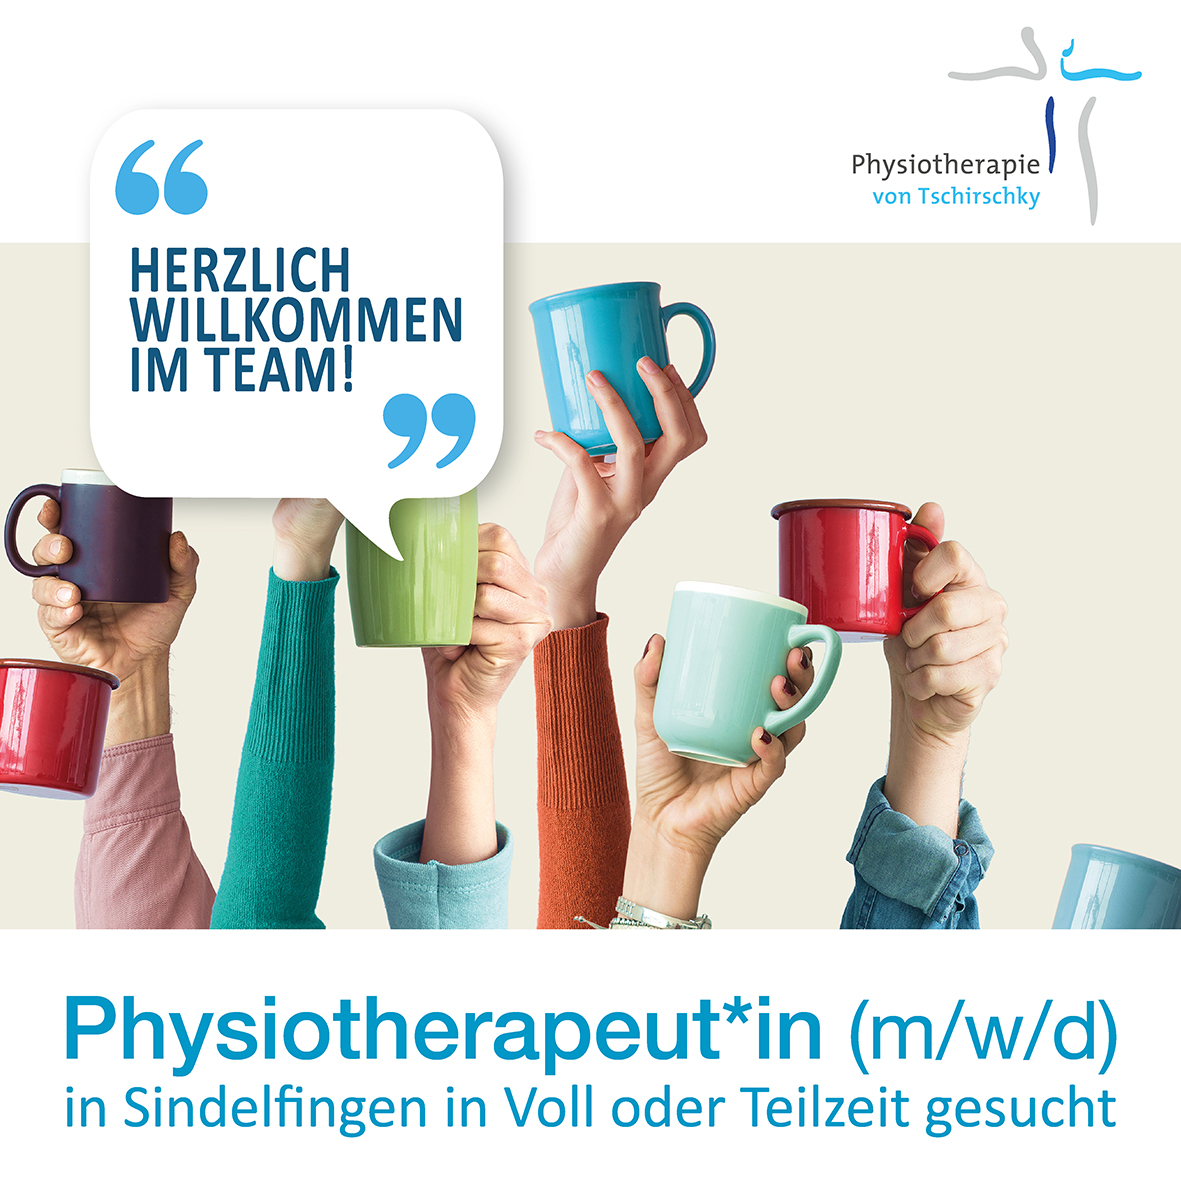 Physiotherapeut*in (m/w/d) gesucht